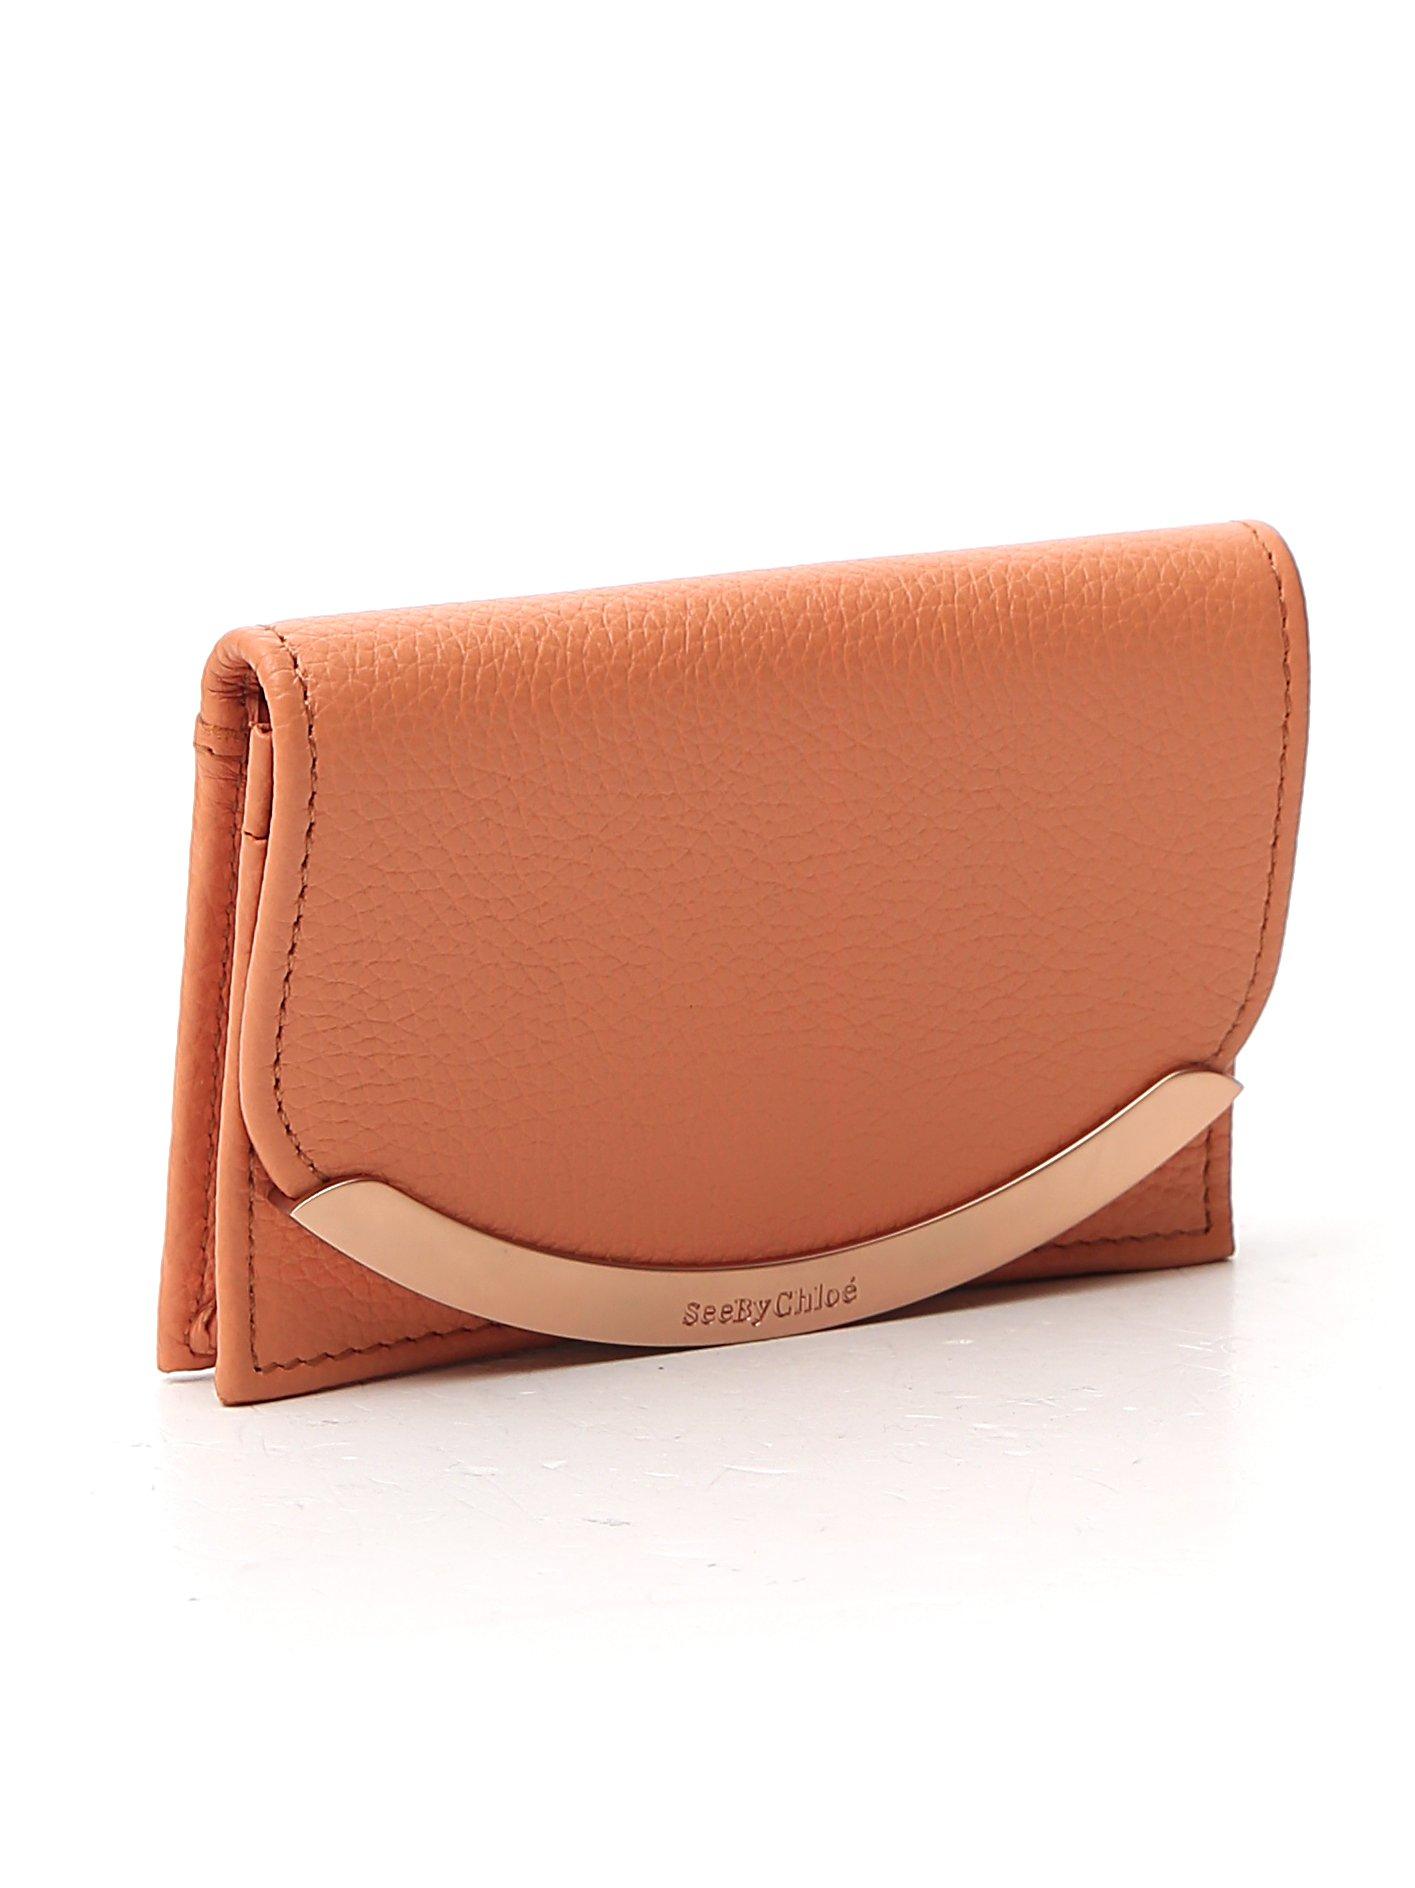 See By Chloé Leather Logo Plaque Foldover Wallet in Orange | Lyst